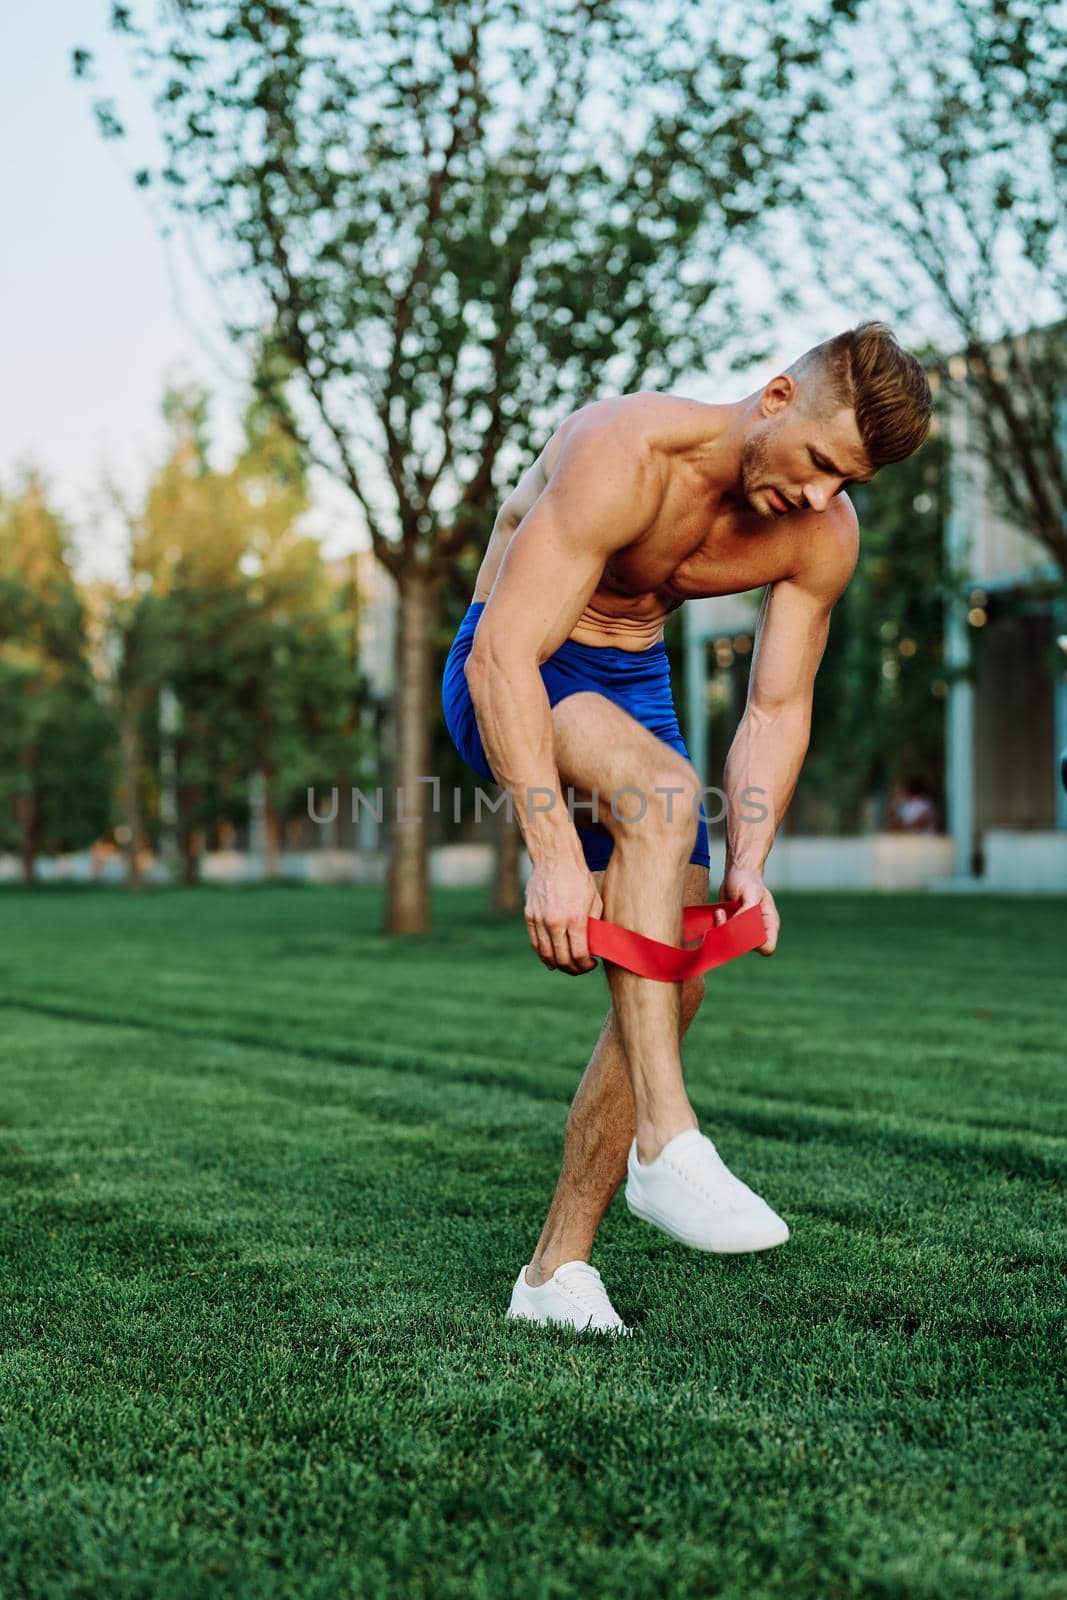 male athlete with pumped up body in parks crossfit workout by Vichizh